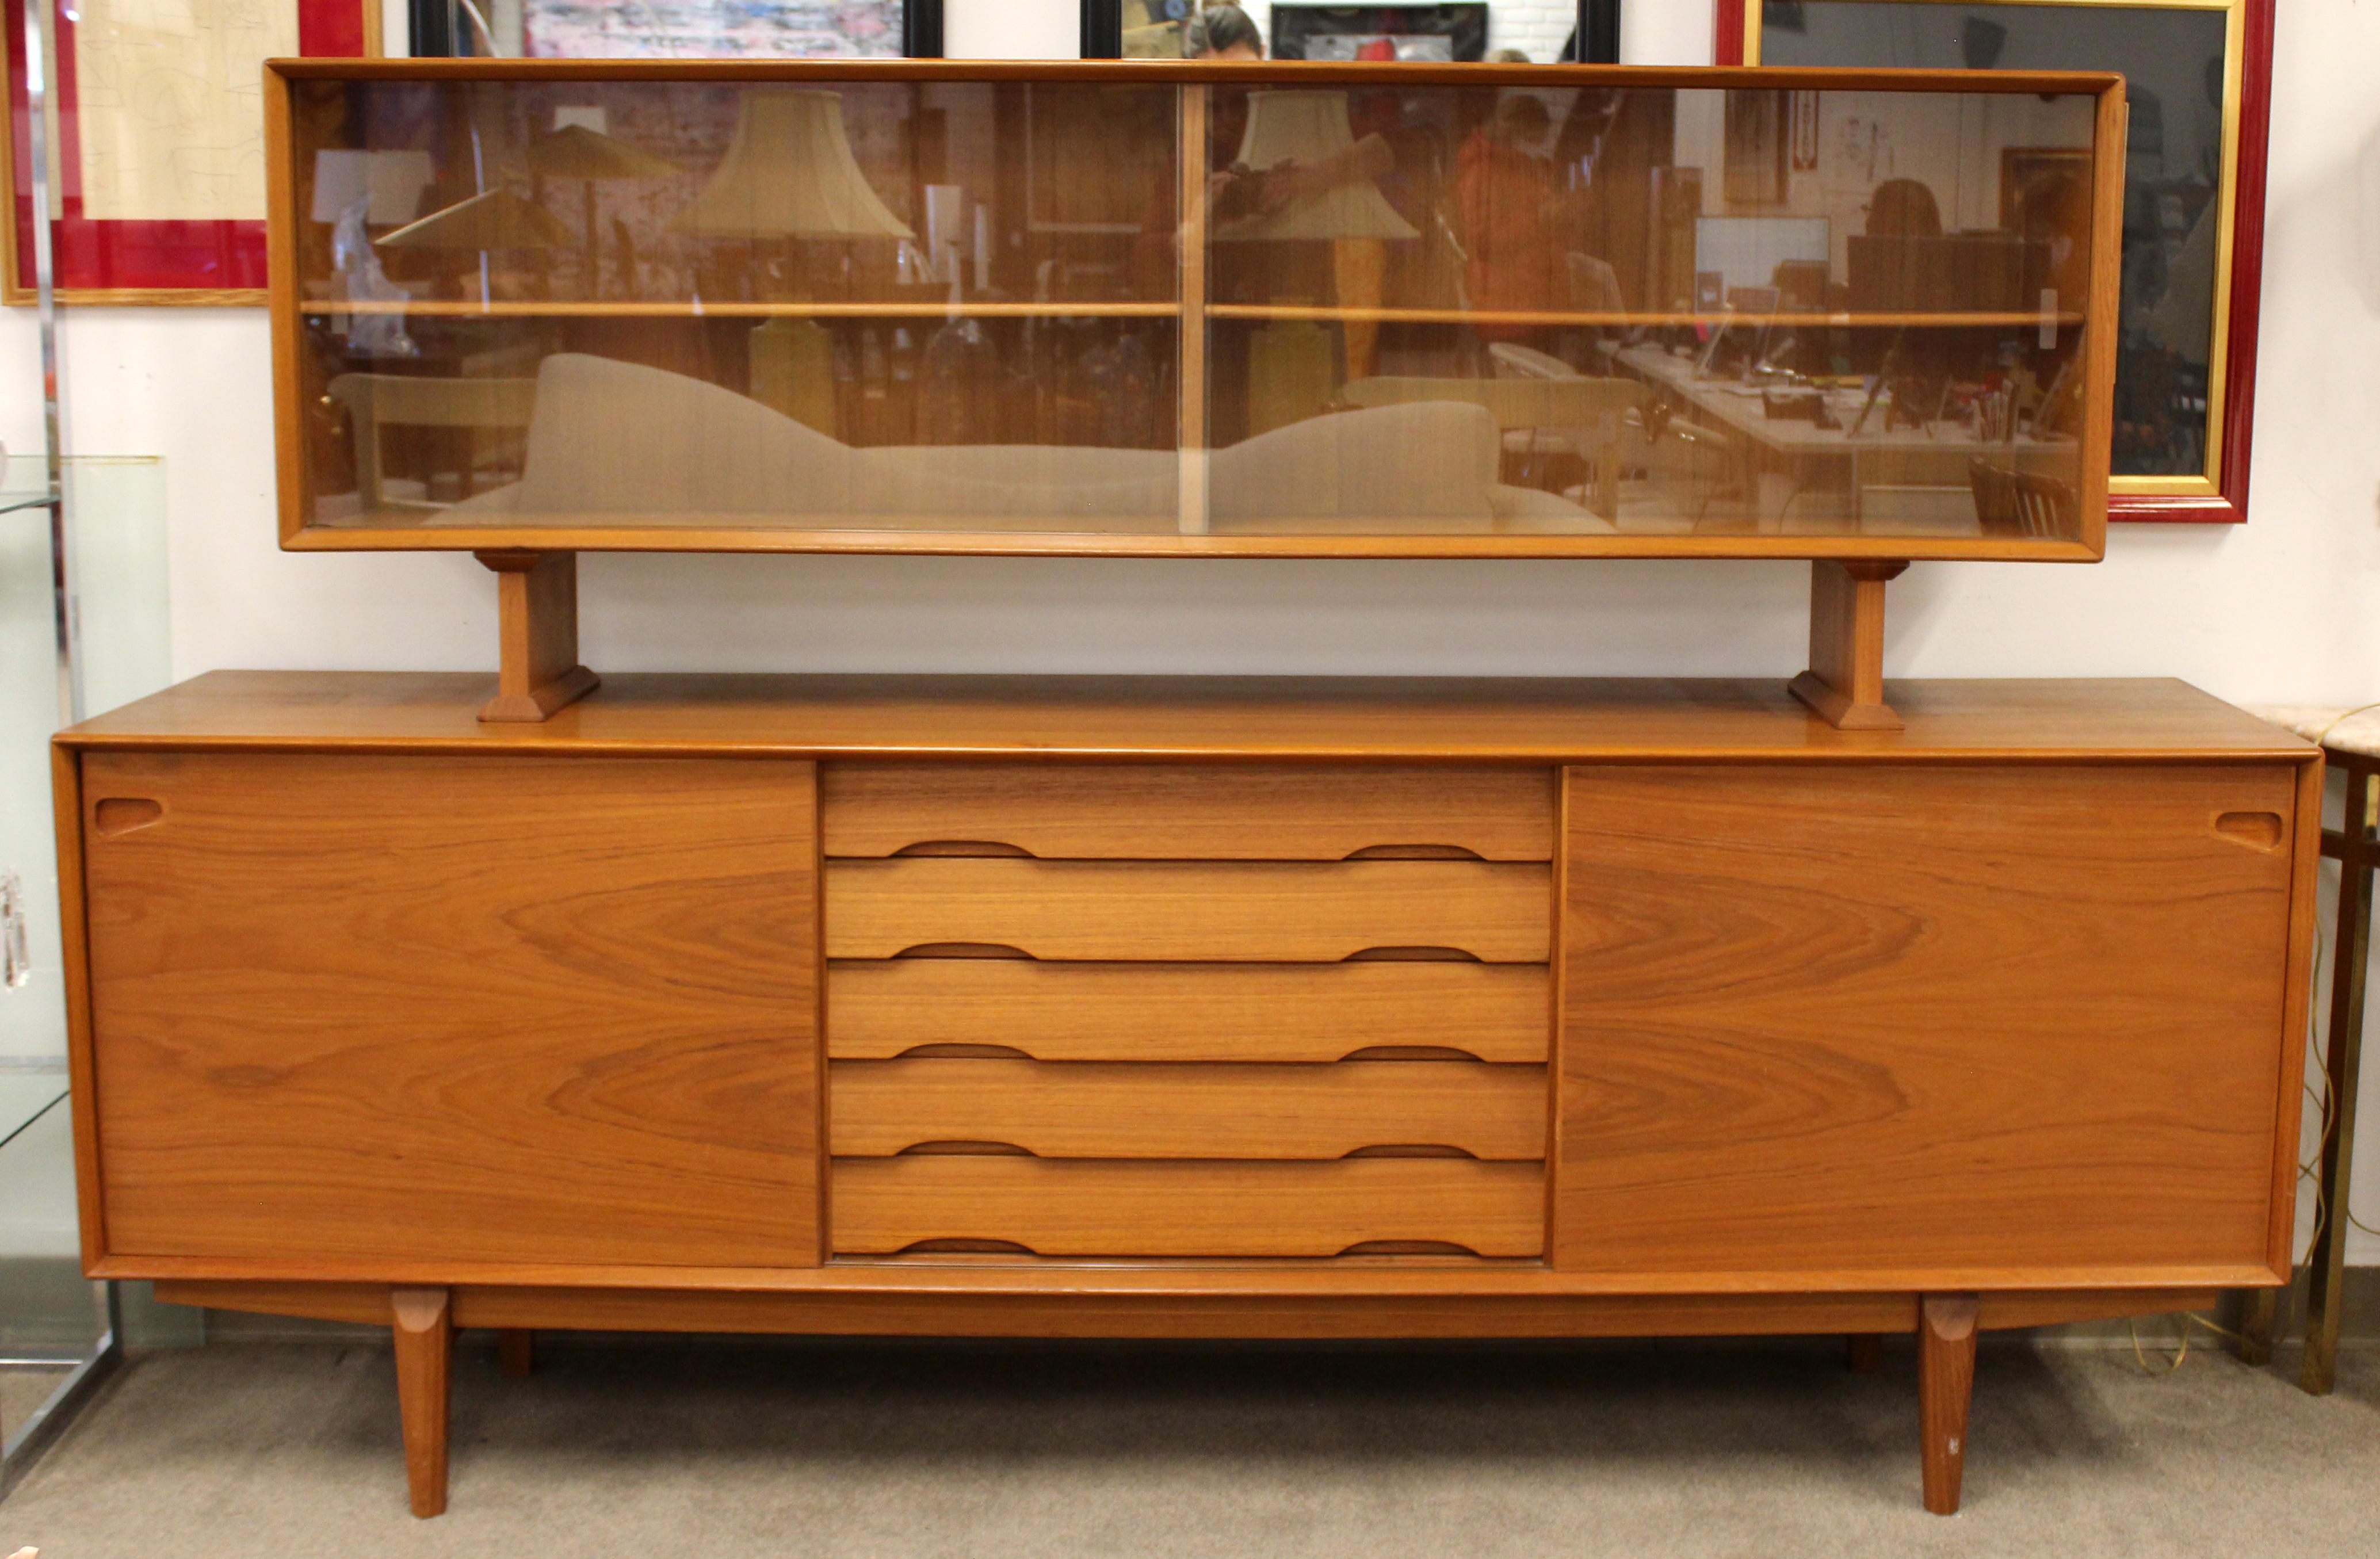 For your consideration is a stupendous and rare, teak credenza, with sliding doors, and a hutch with glass doors, by Rosengren Hansen for Dyrlund, made in Denmark, circa 1960s. In excellent vintage condition. The dimensions are 86.5